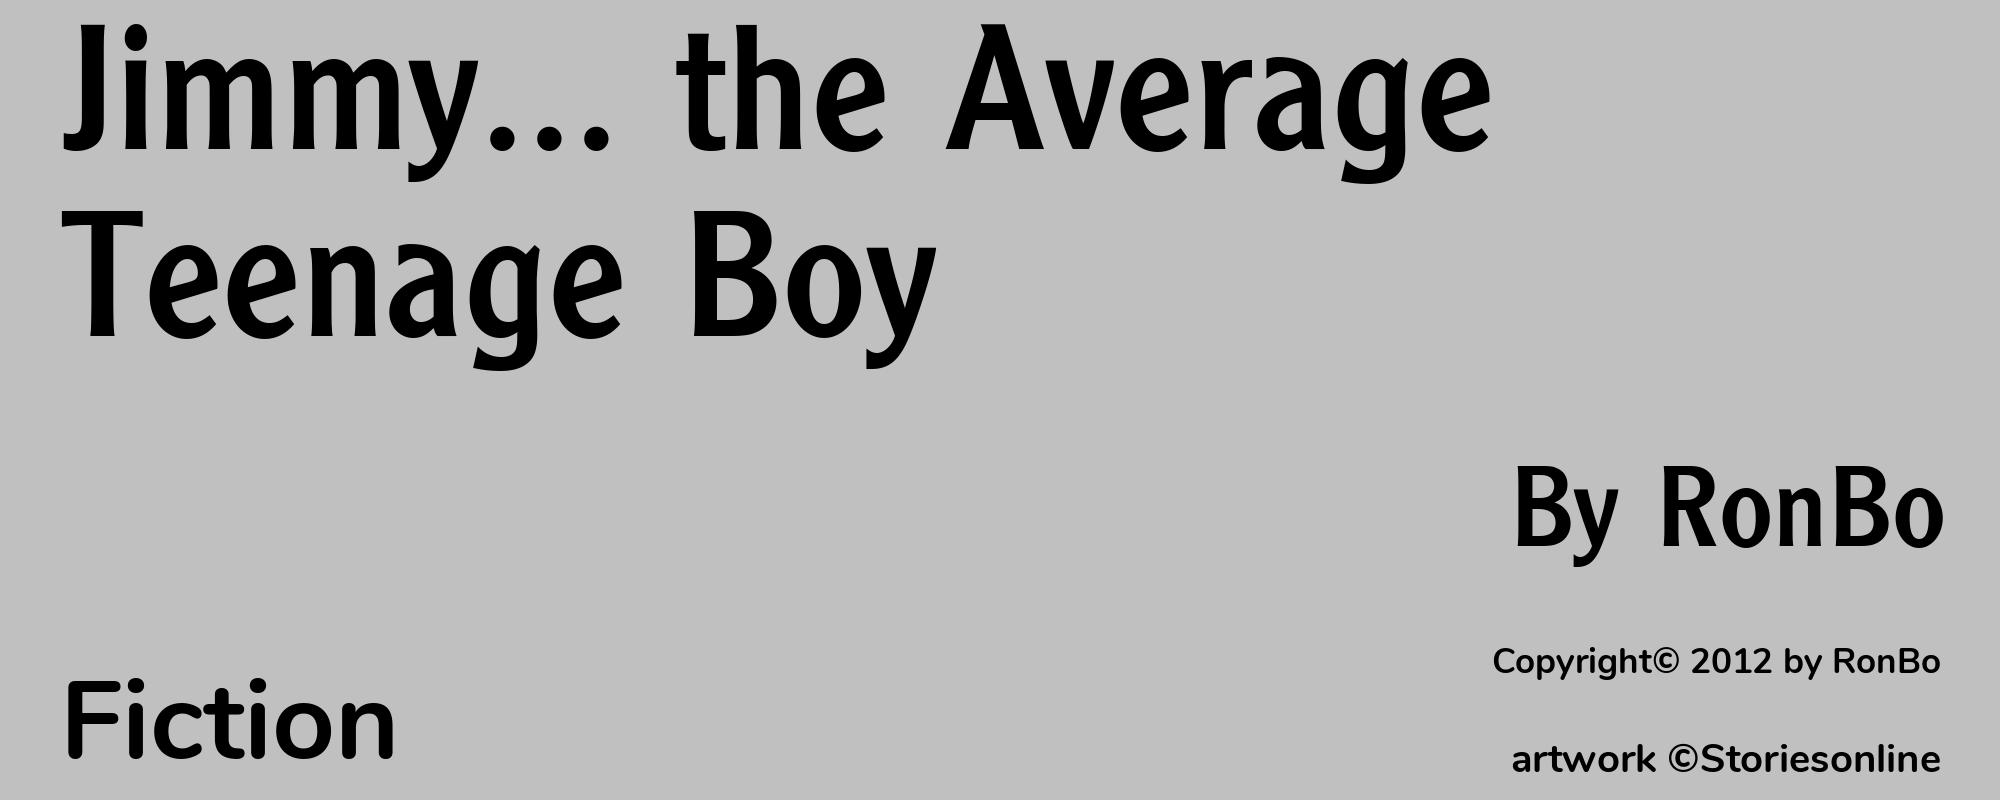 Jimmy... the Average Teenage Boy - Cover